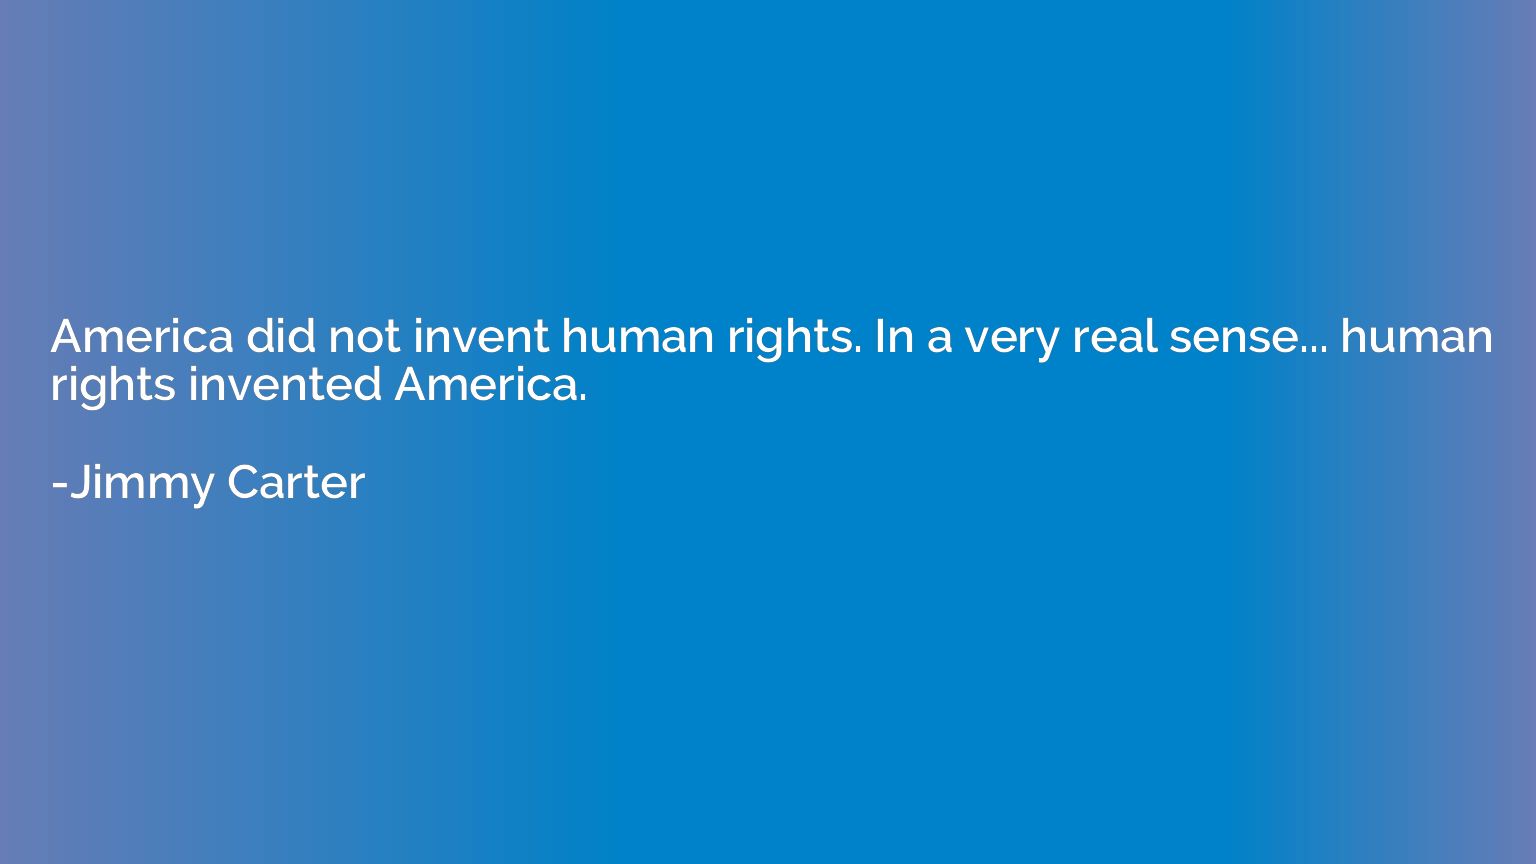 America did not invent human rights. In a very real sense...